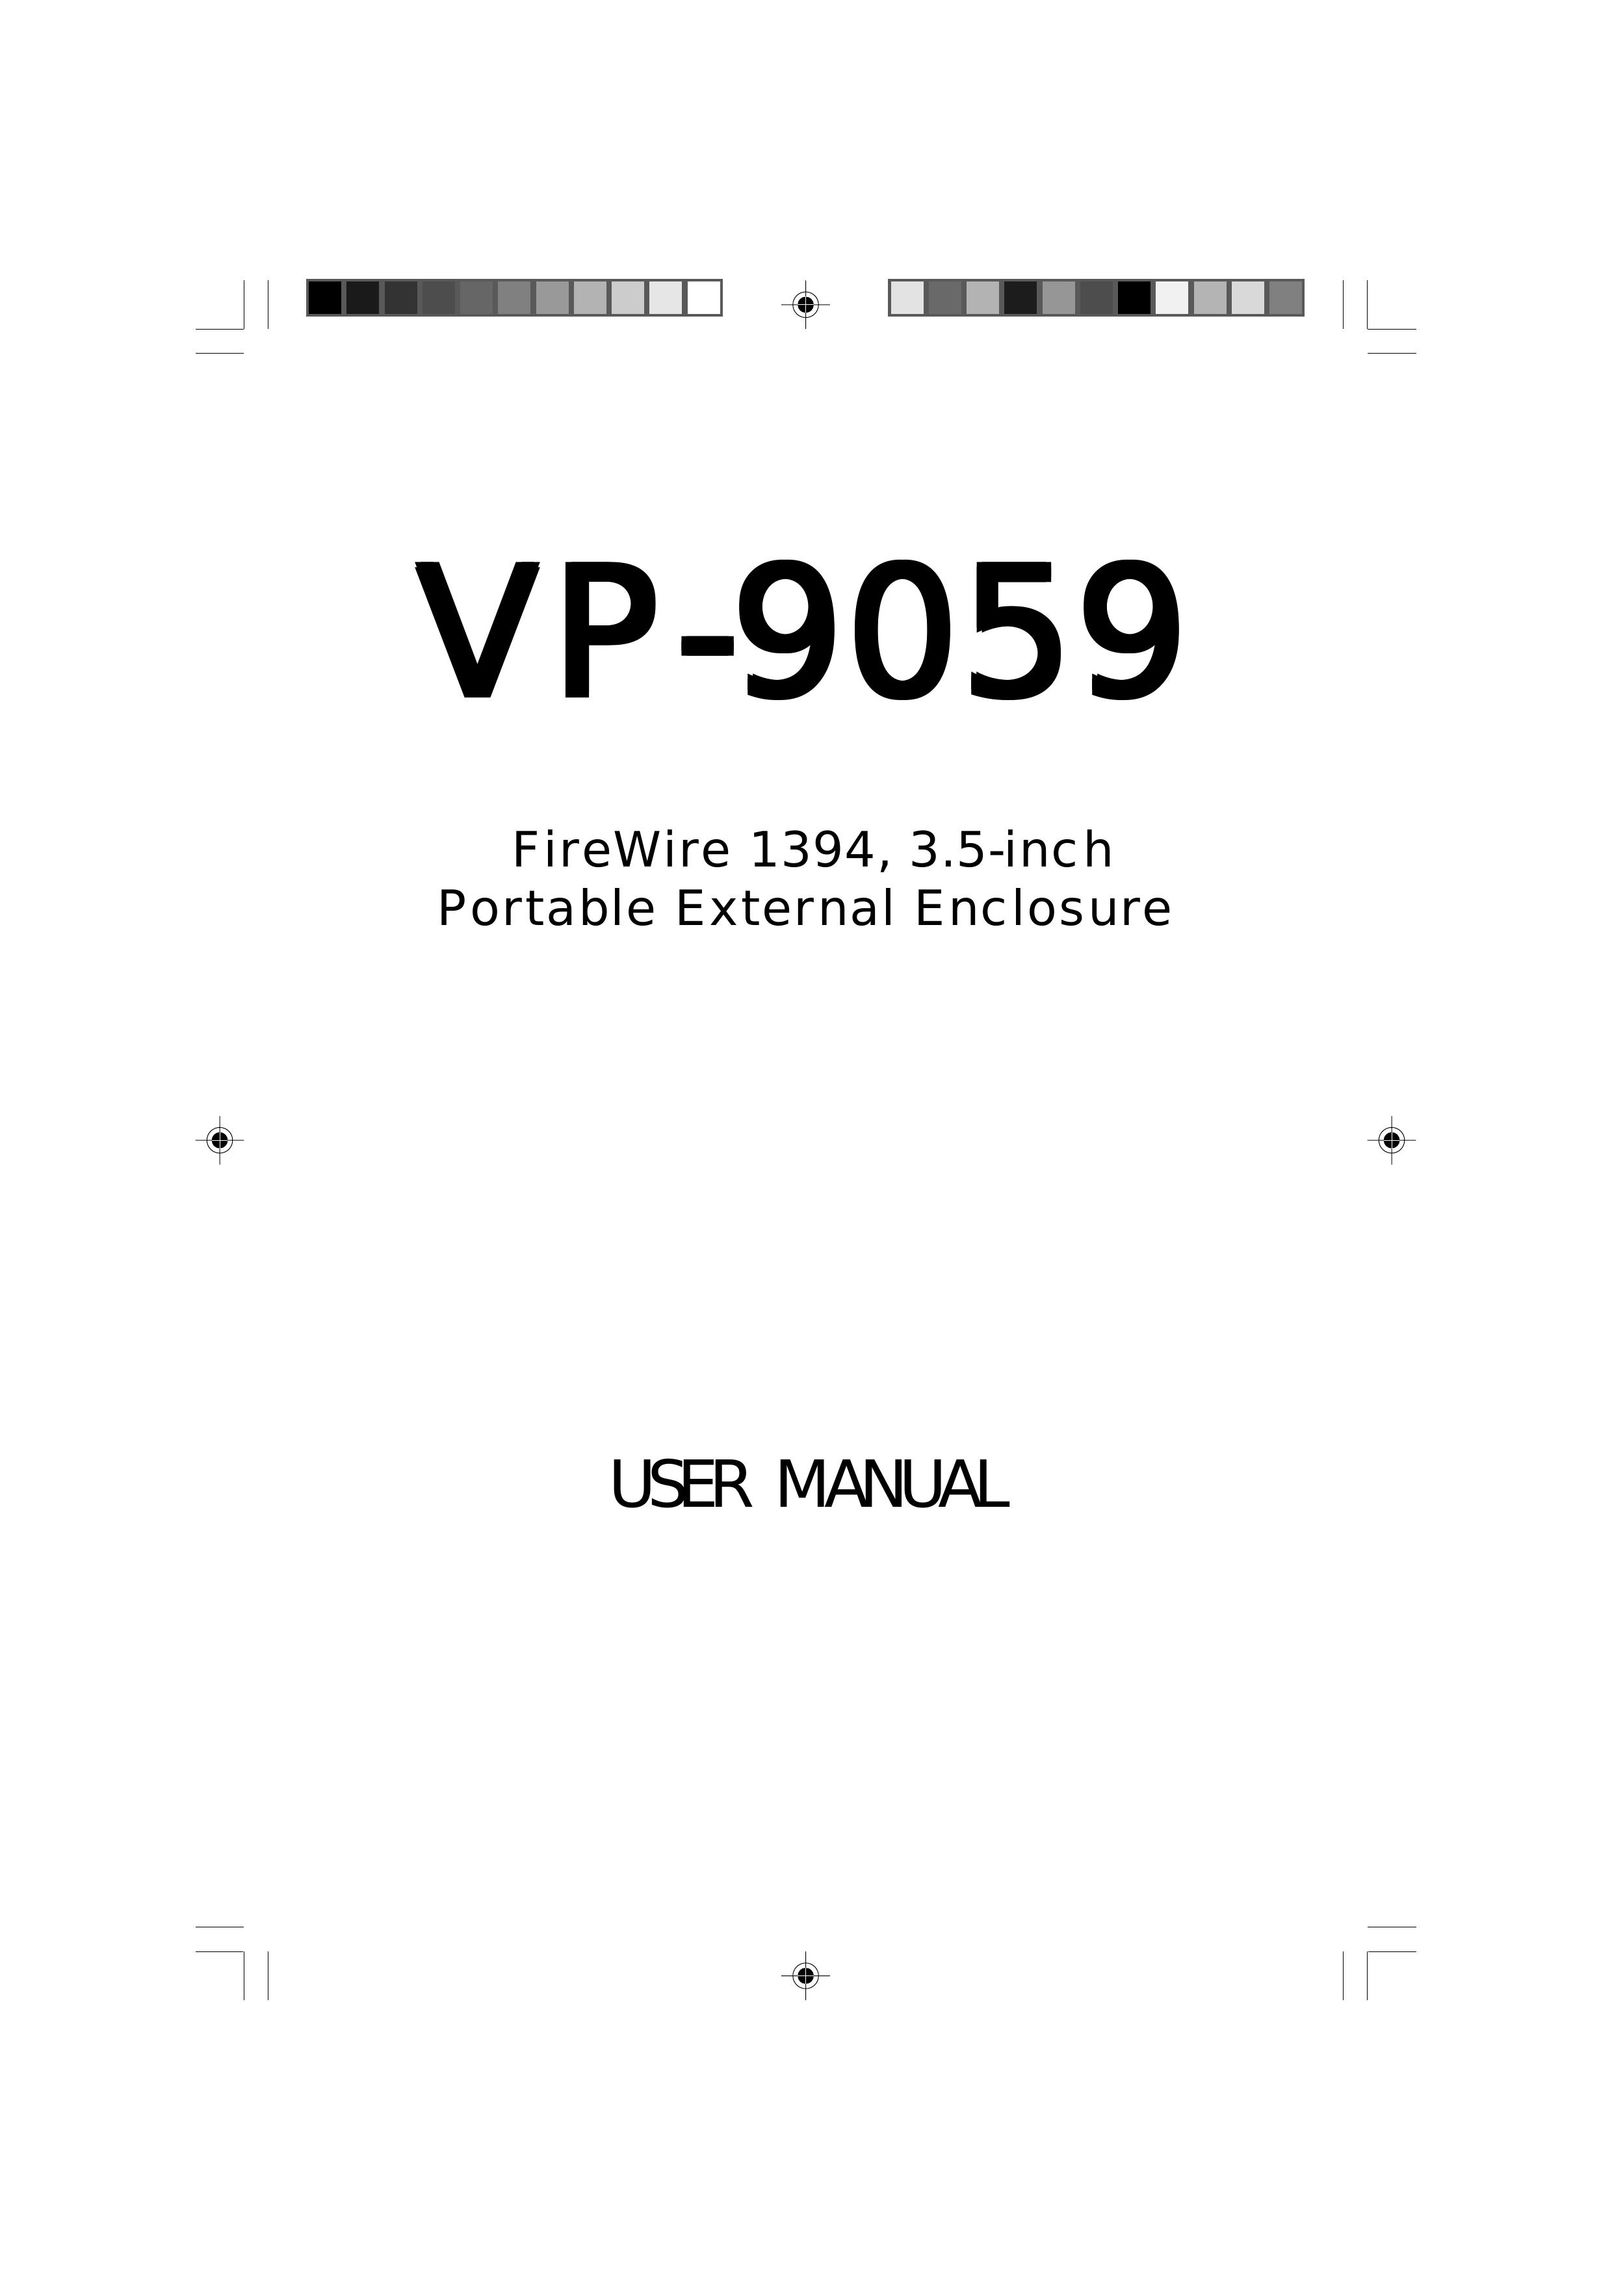 VIPowER VP-9059 Network Router User Manual